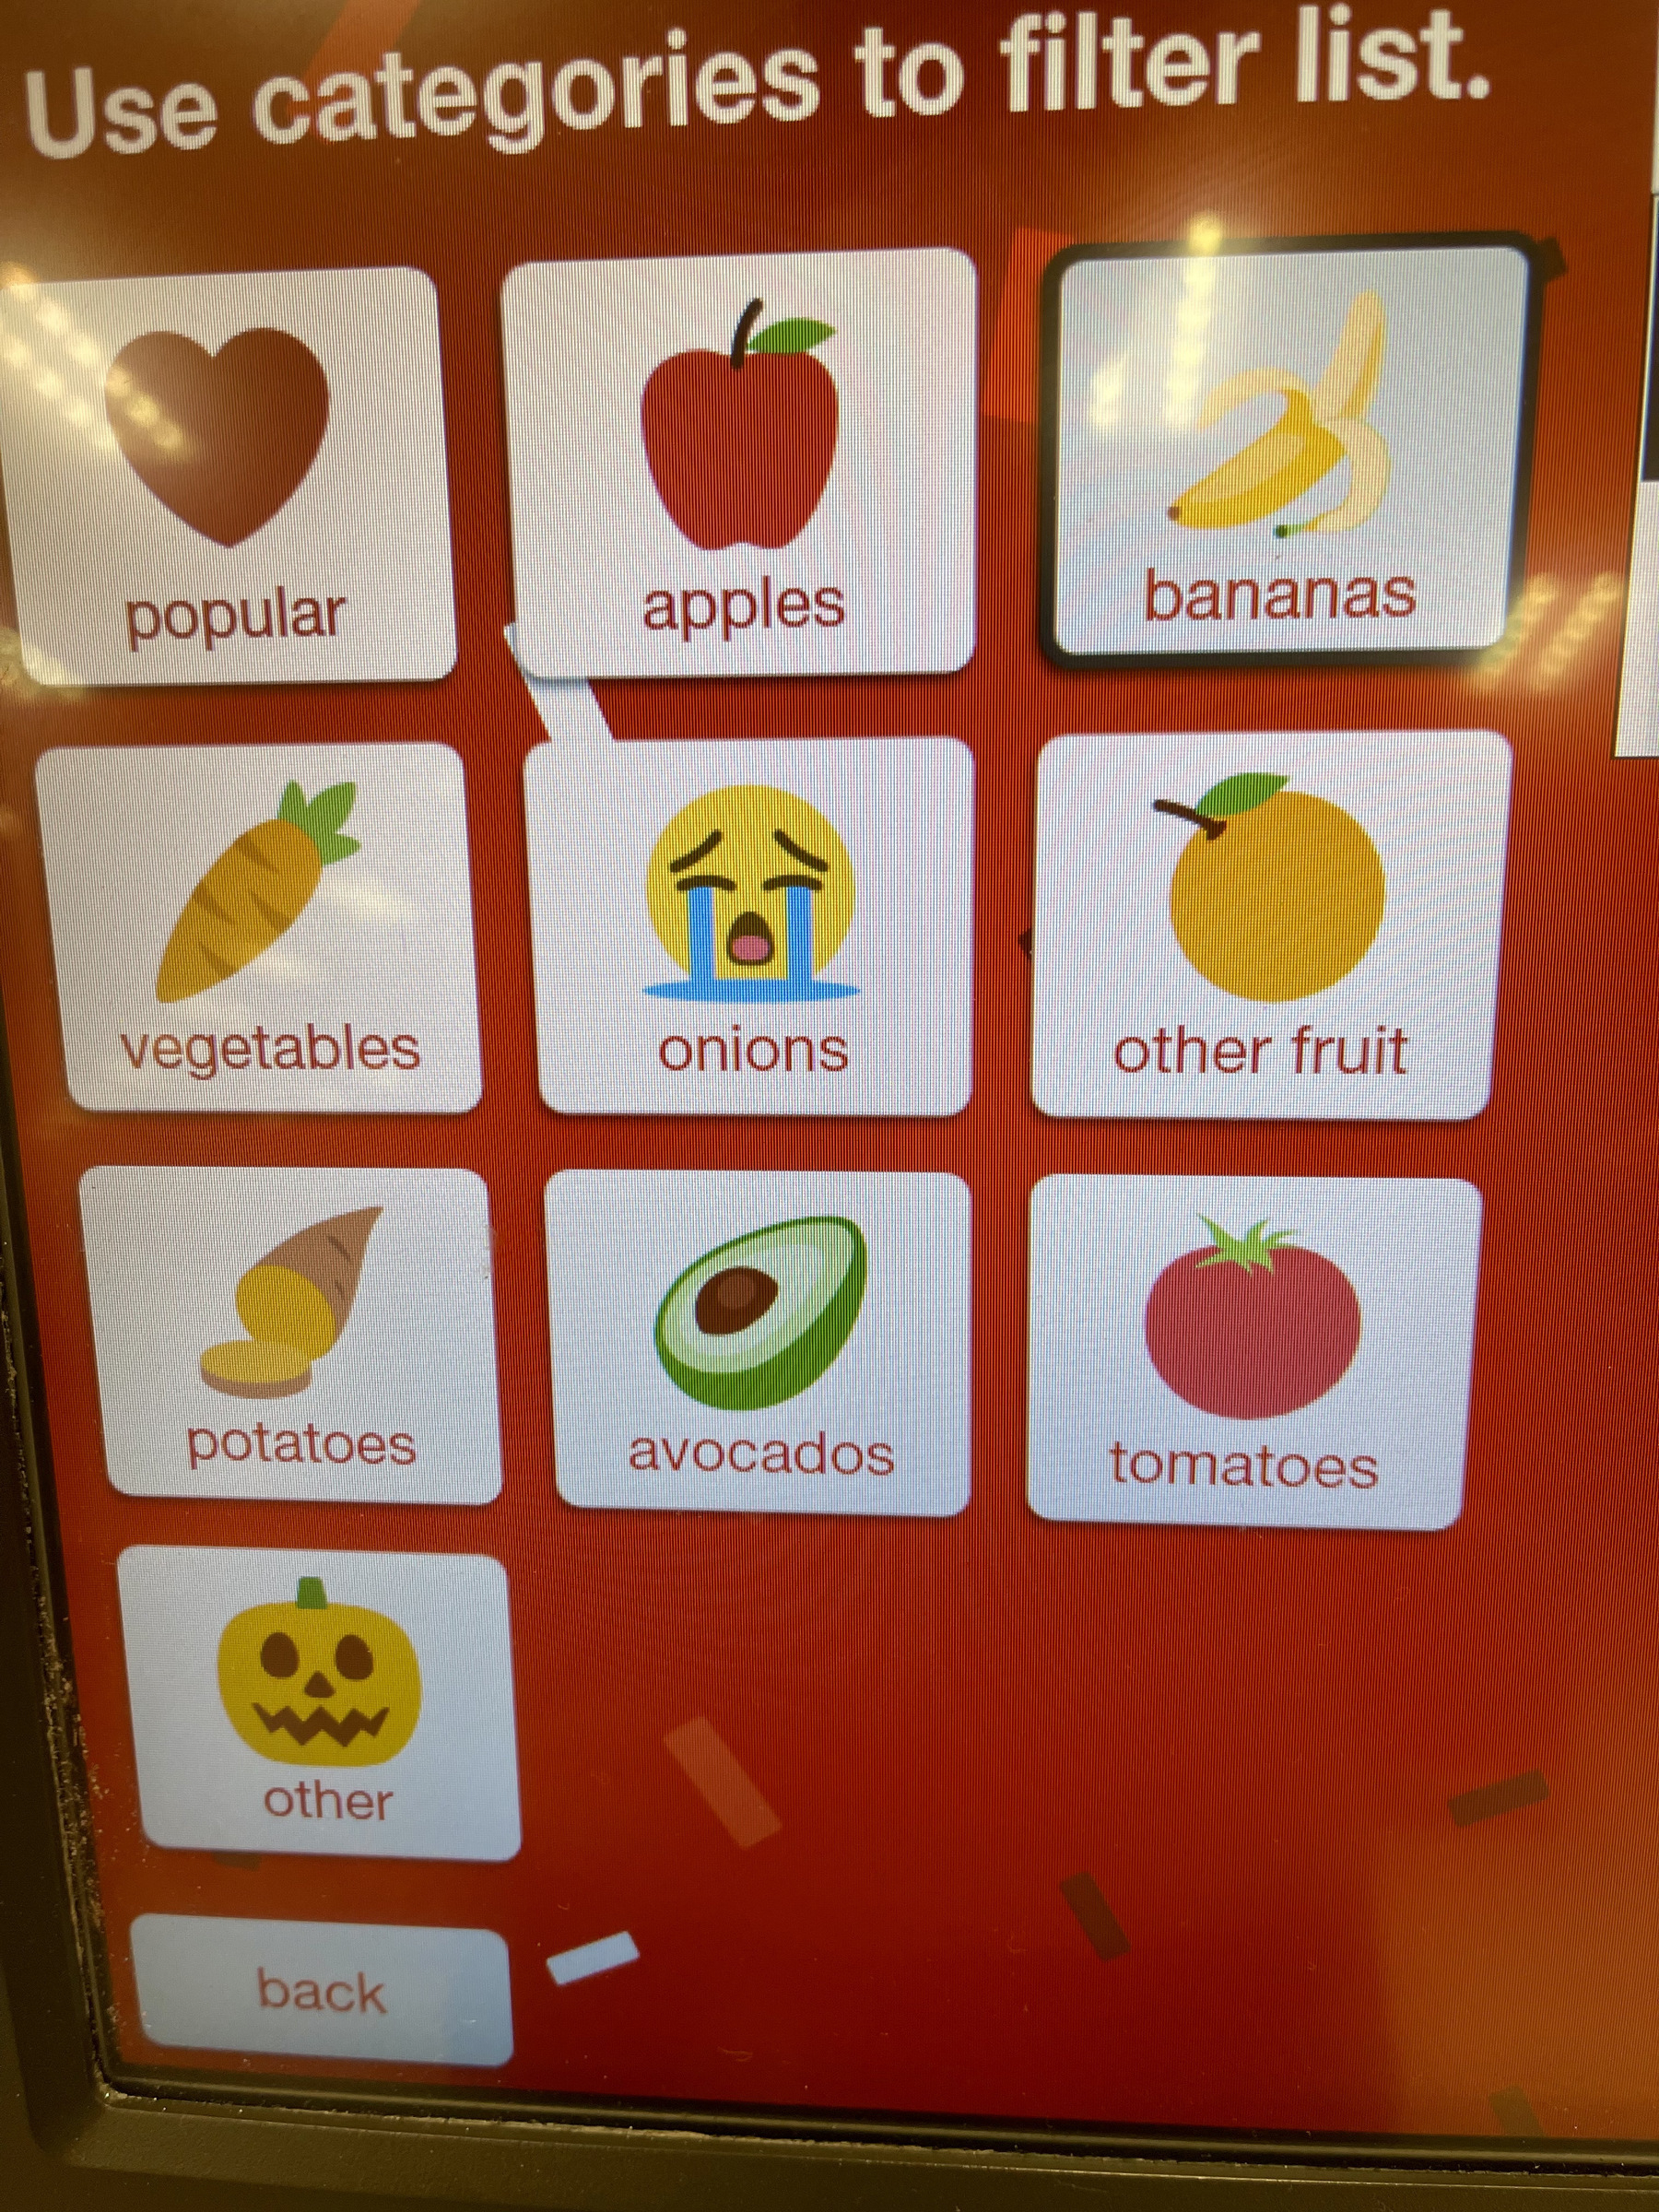 Picture of the self-checkout shopping interface at Target department store for choosing the produce category